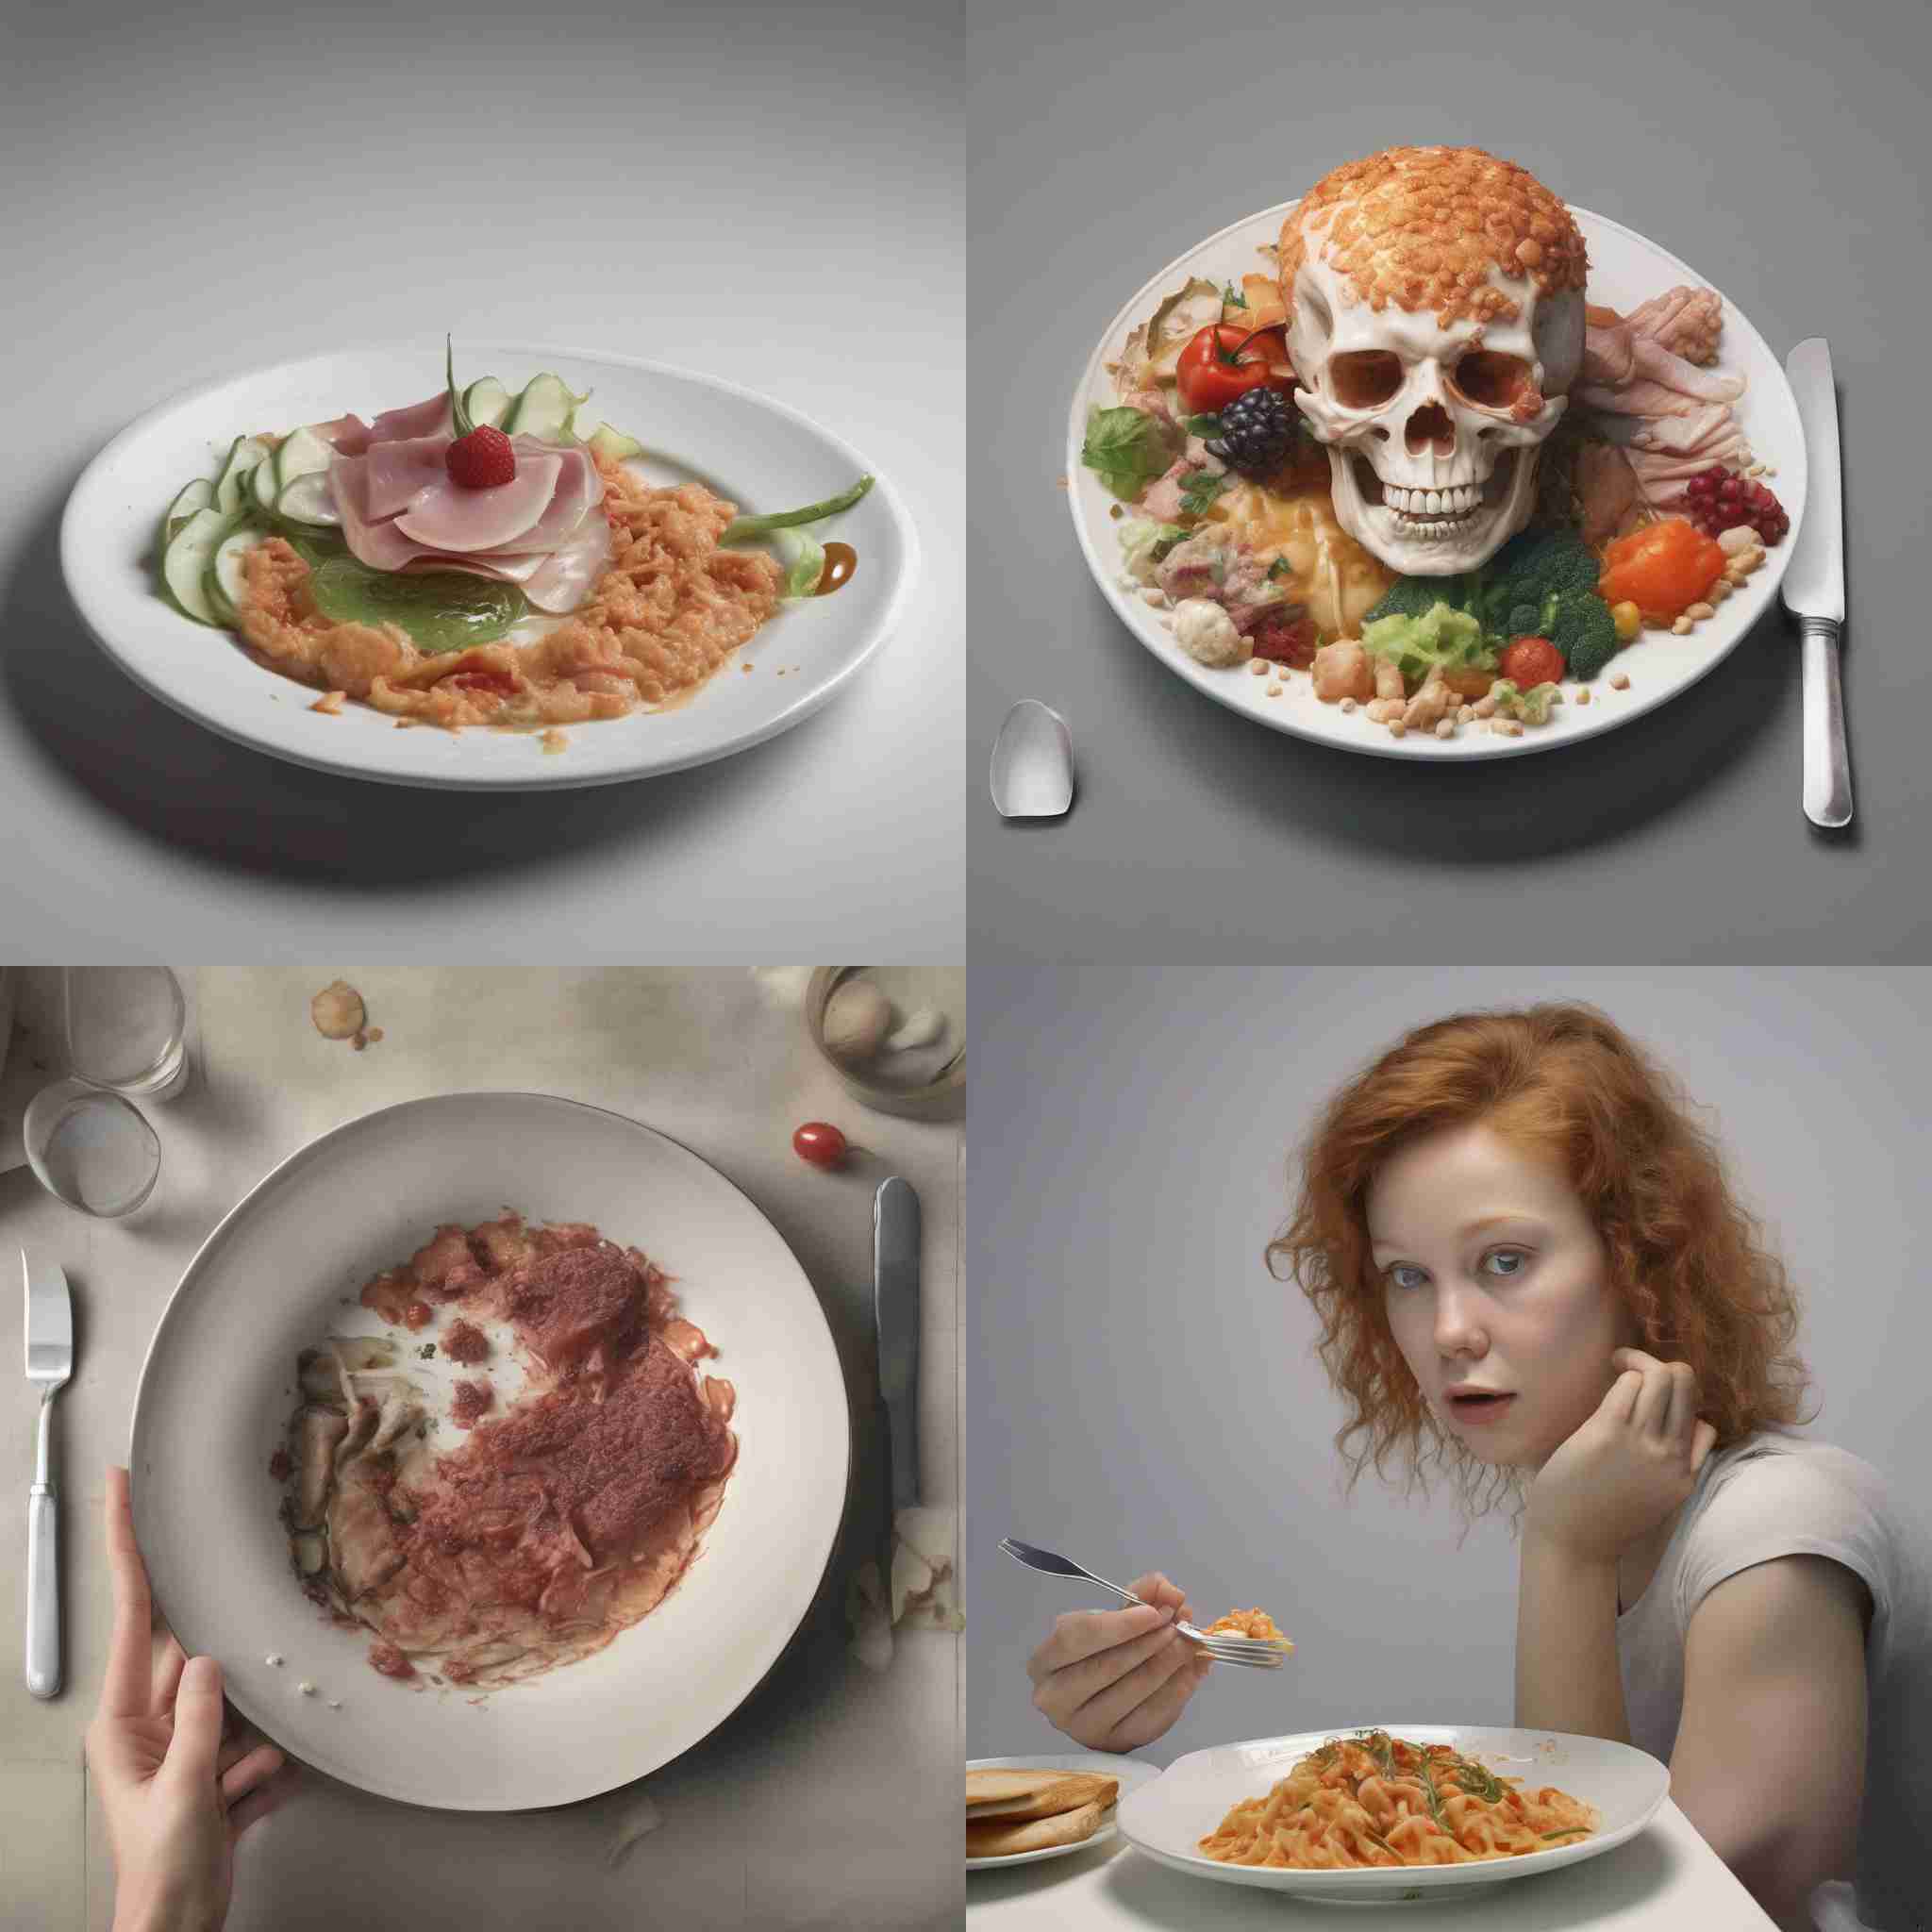 The dish of a person just beginning to eat